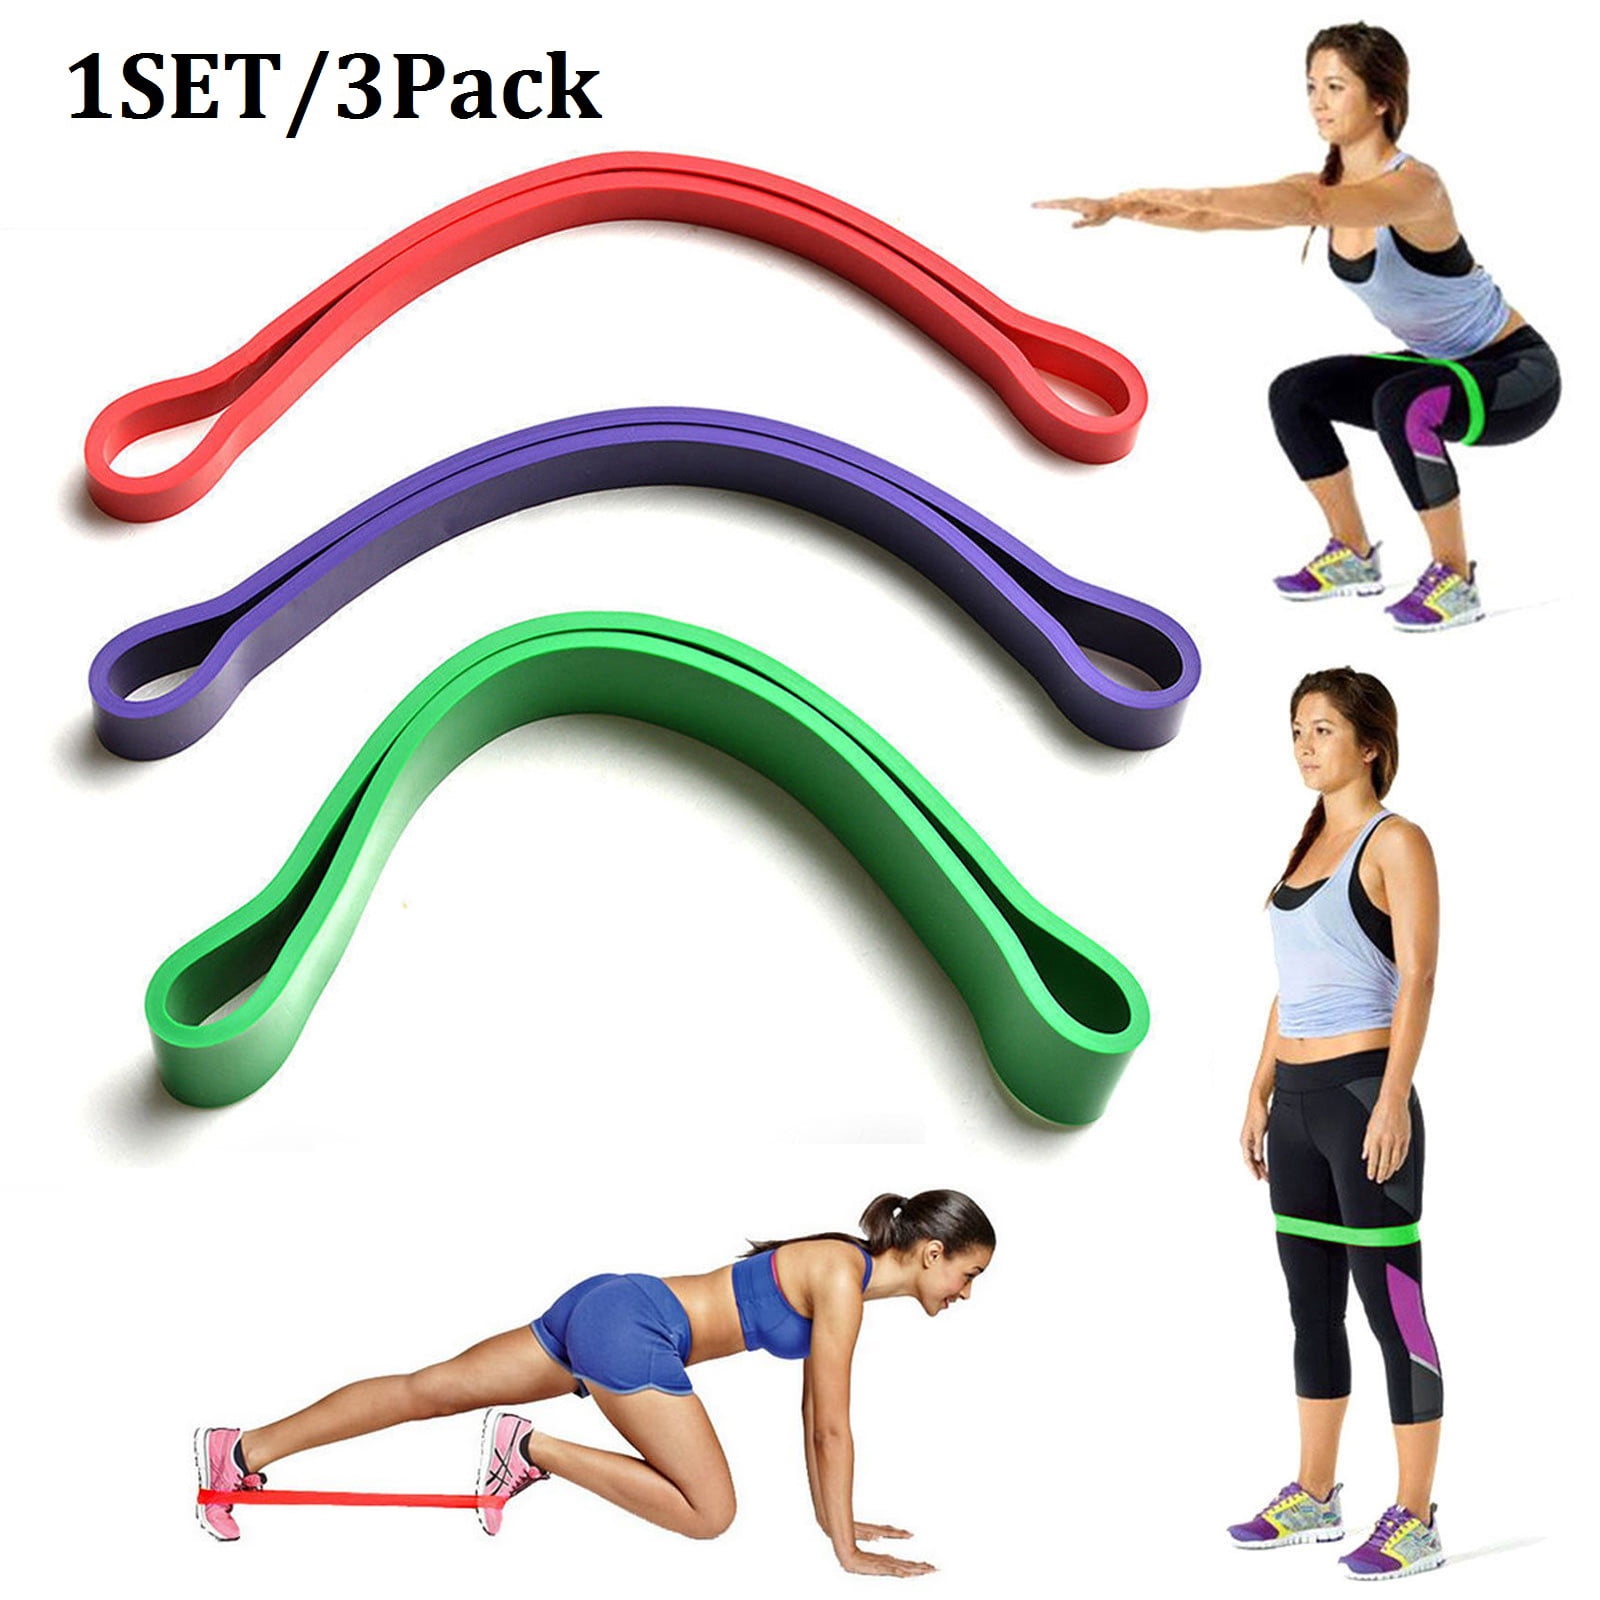 Zelfrespect ticket bout TSV Exercise Resistance Bands, Strength Workout Bands for Women & Men,  Fitness for Training at Home or Gym, Light, Medium & Heavy Resistance  Levels - Walmart.com